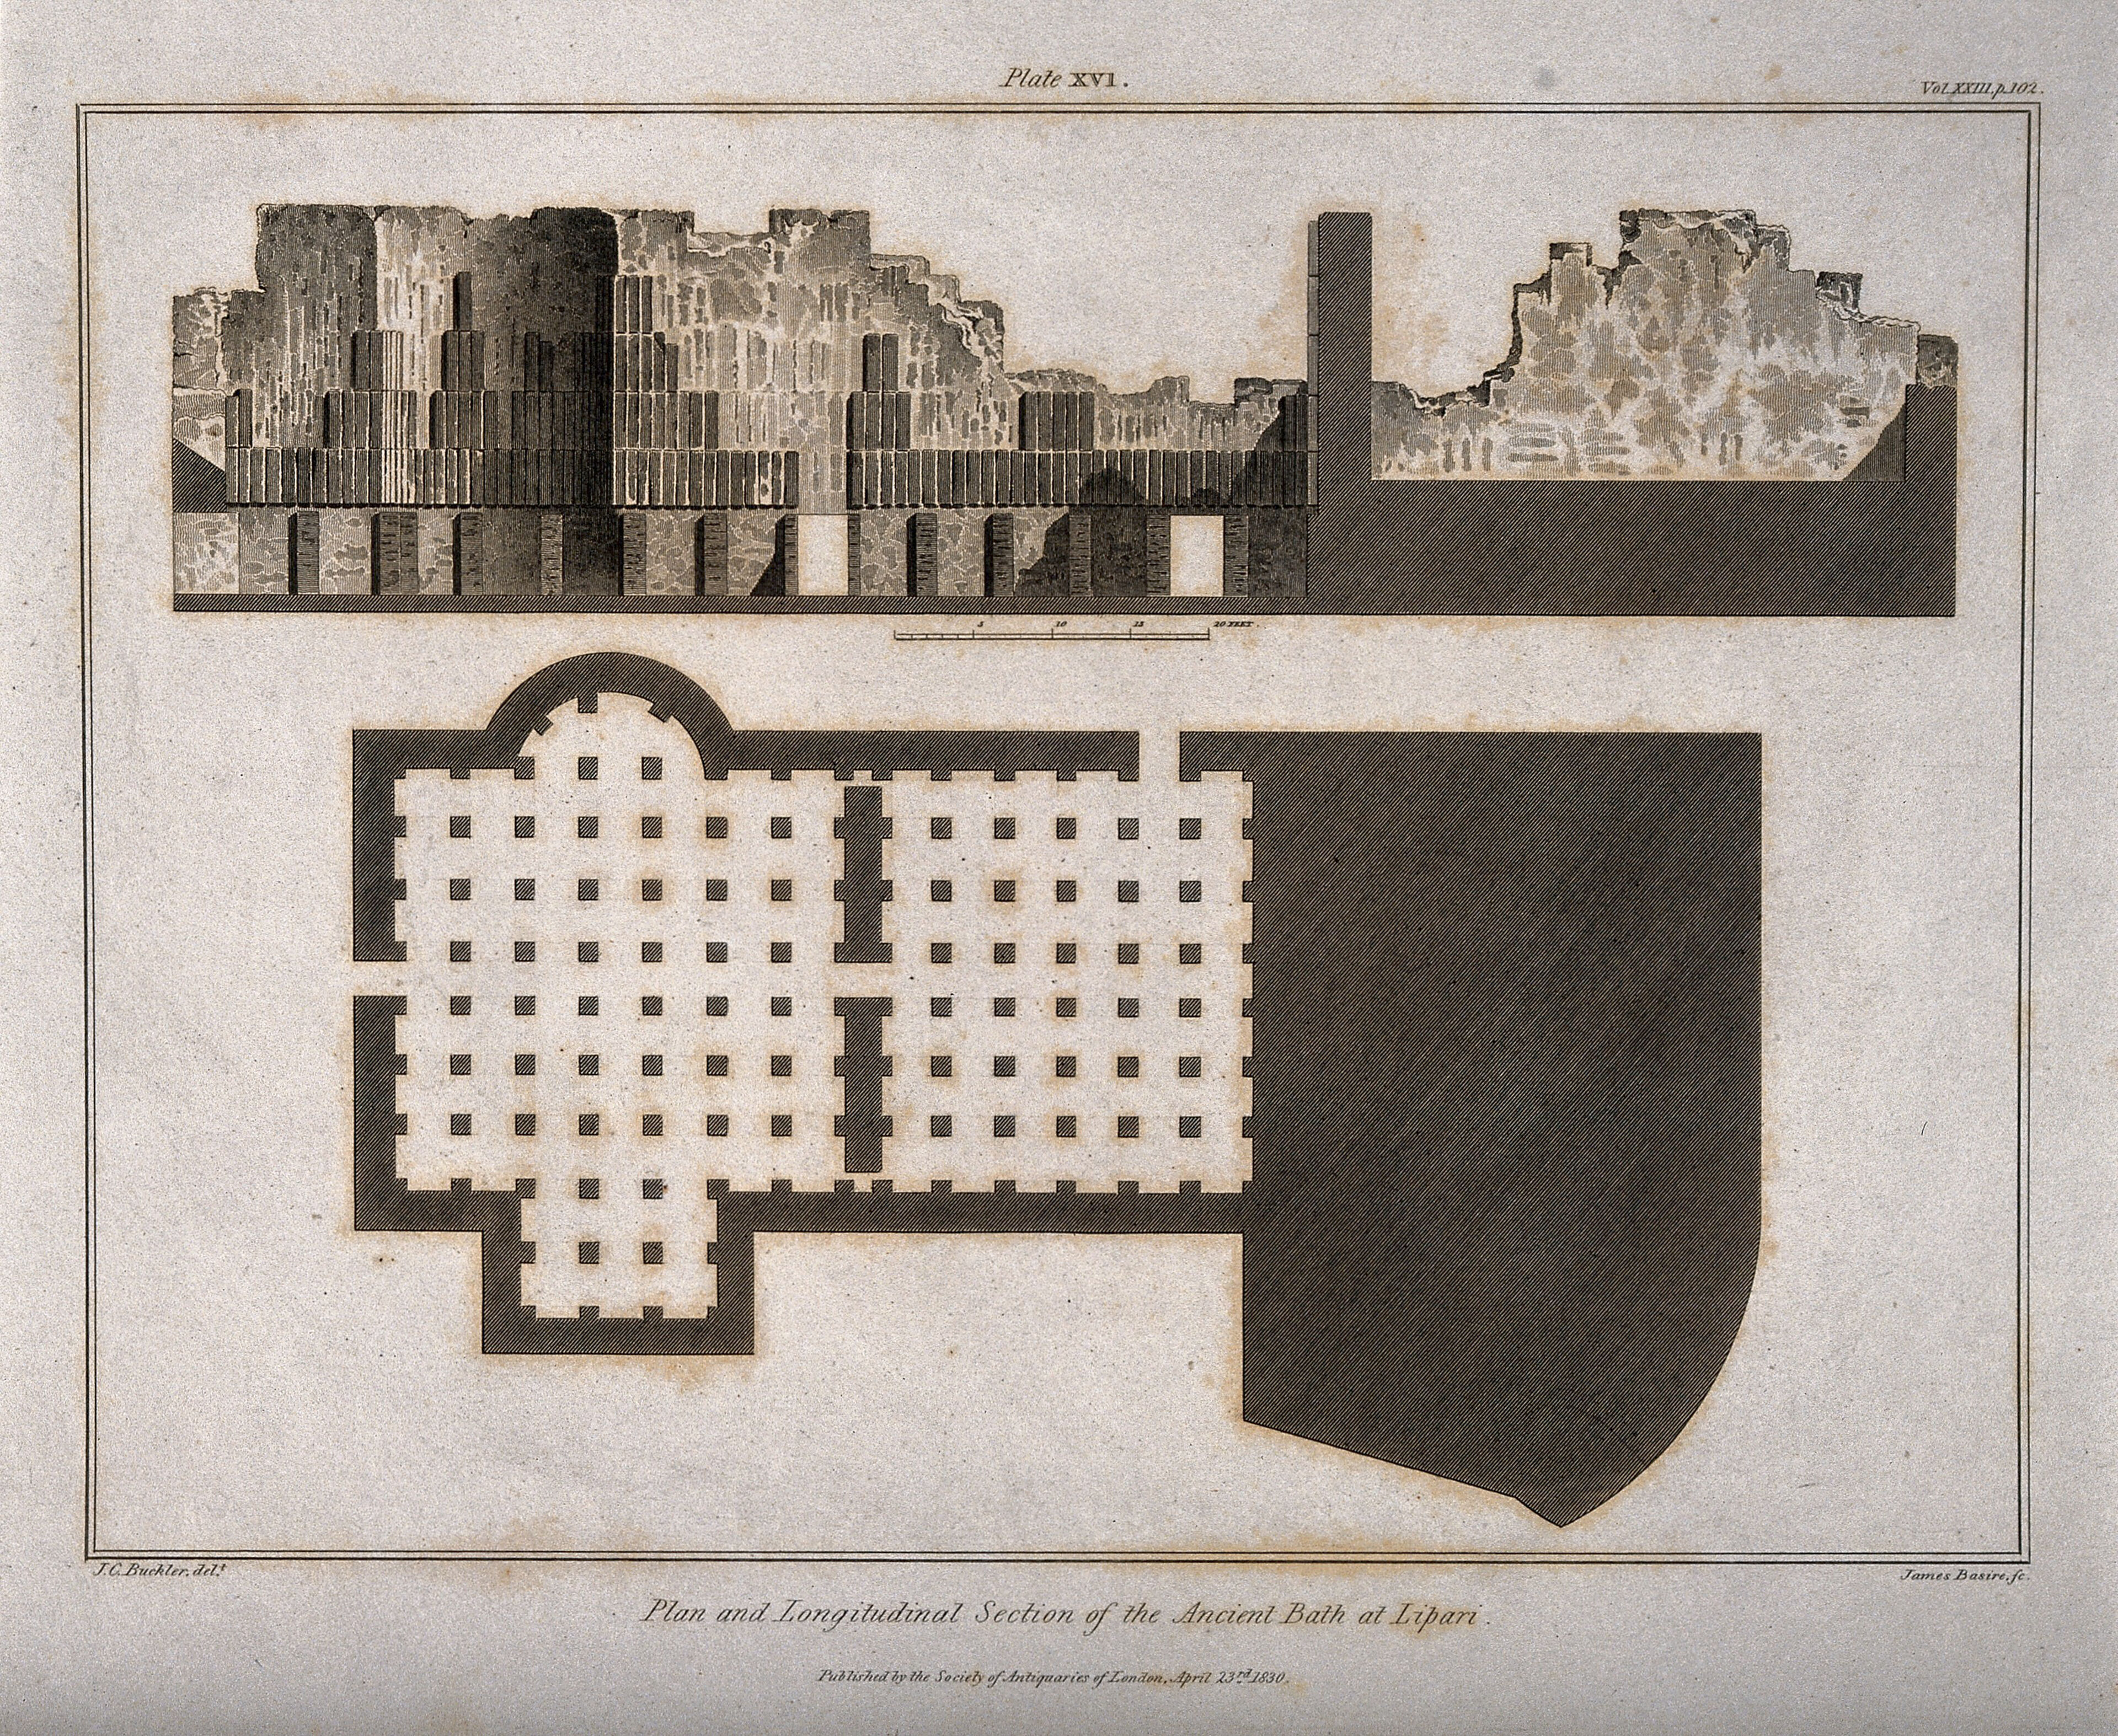 Lipari, Italy: floor plan and cross sections of an ancient bath. Line engraving by J. Basire, 1830, after J.C. Buckler.